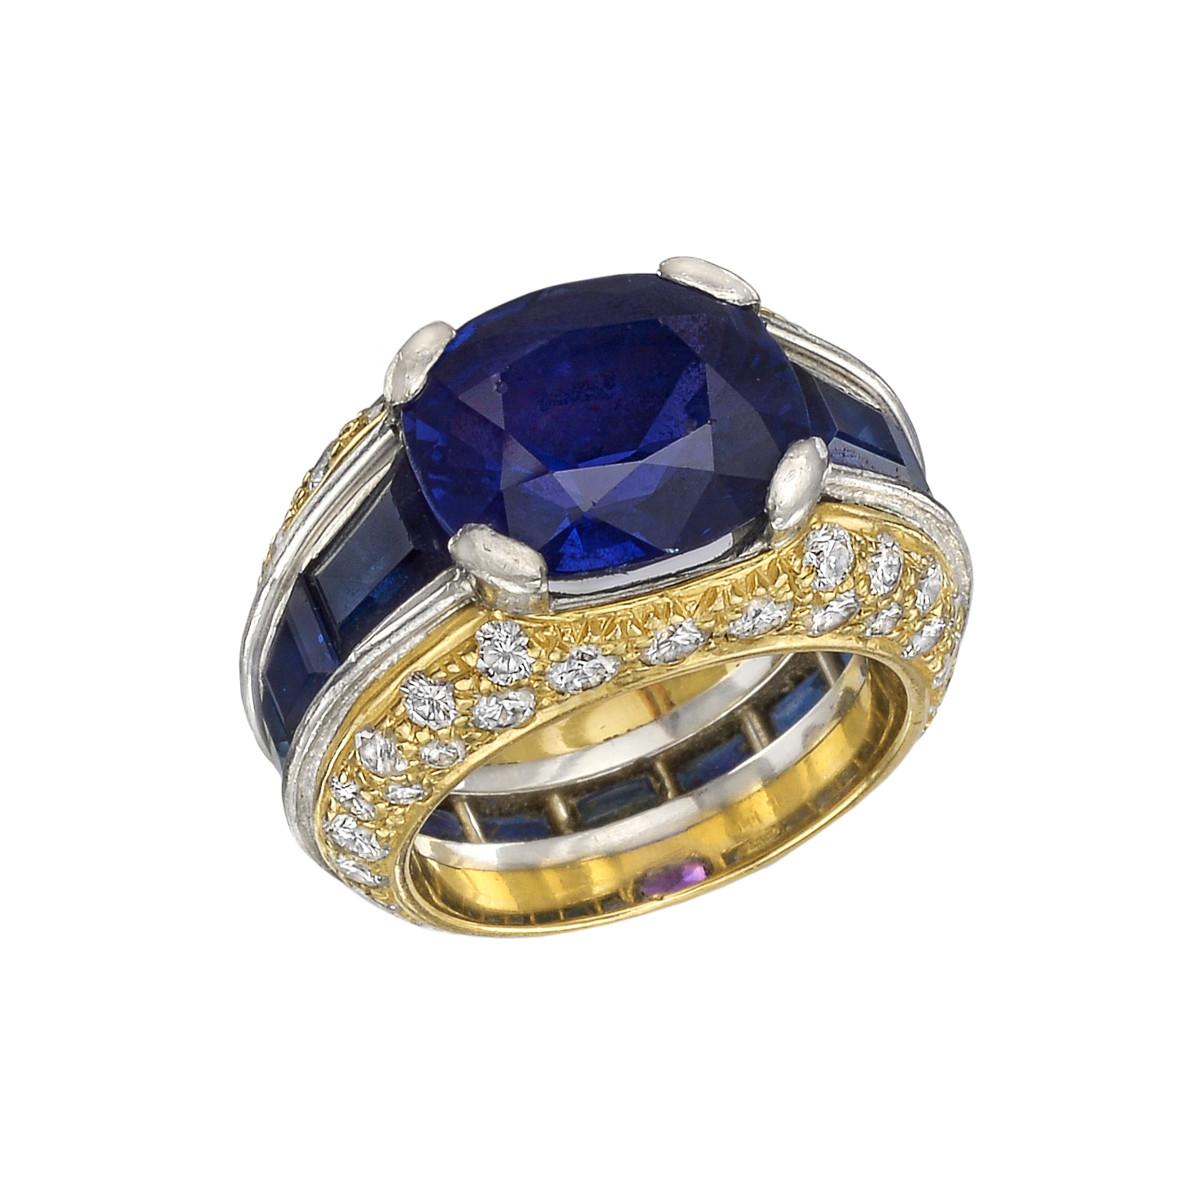 Domed cocktail ring, centering an oval-shaped faceted color-change blue/purple sapphire weighing approximately 5.15 carats, flanked by calibre-cut blue sapphires and round brilliant-cut diamonds, mounted in 18k yellow gold and platinum.

Twelve